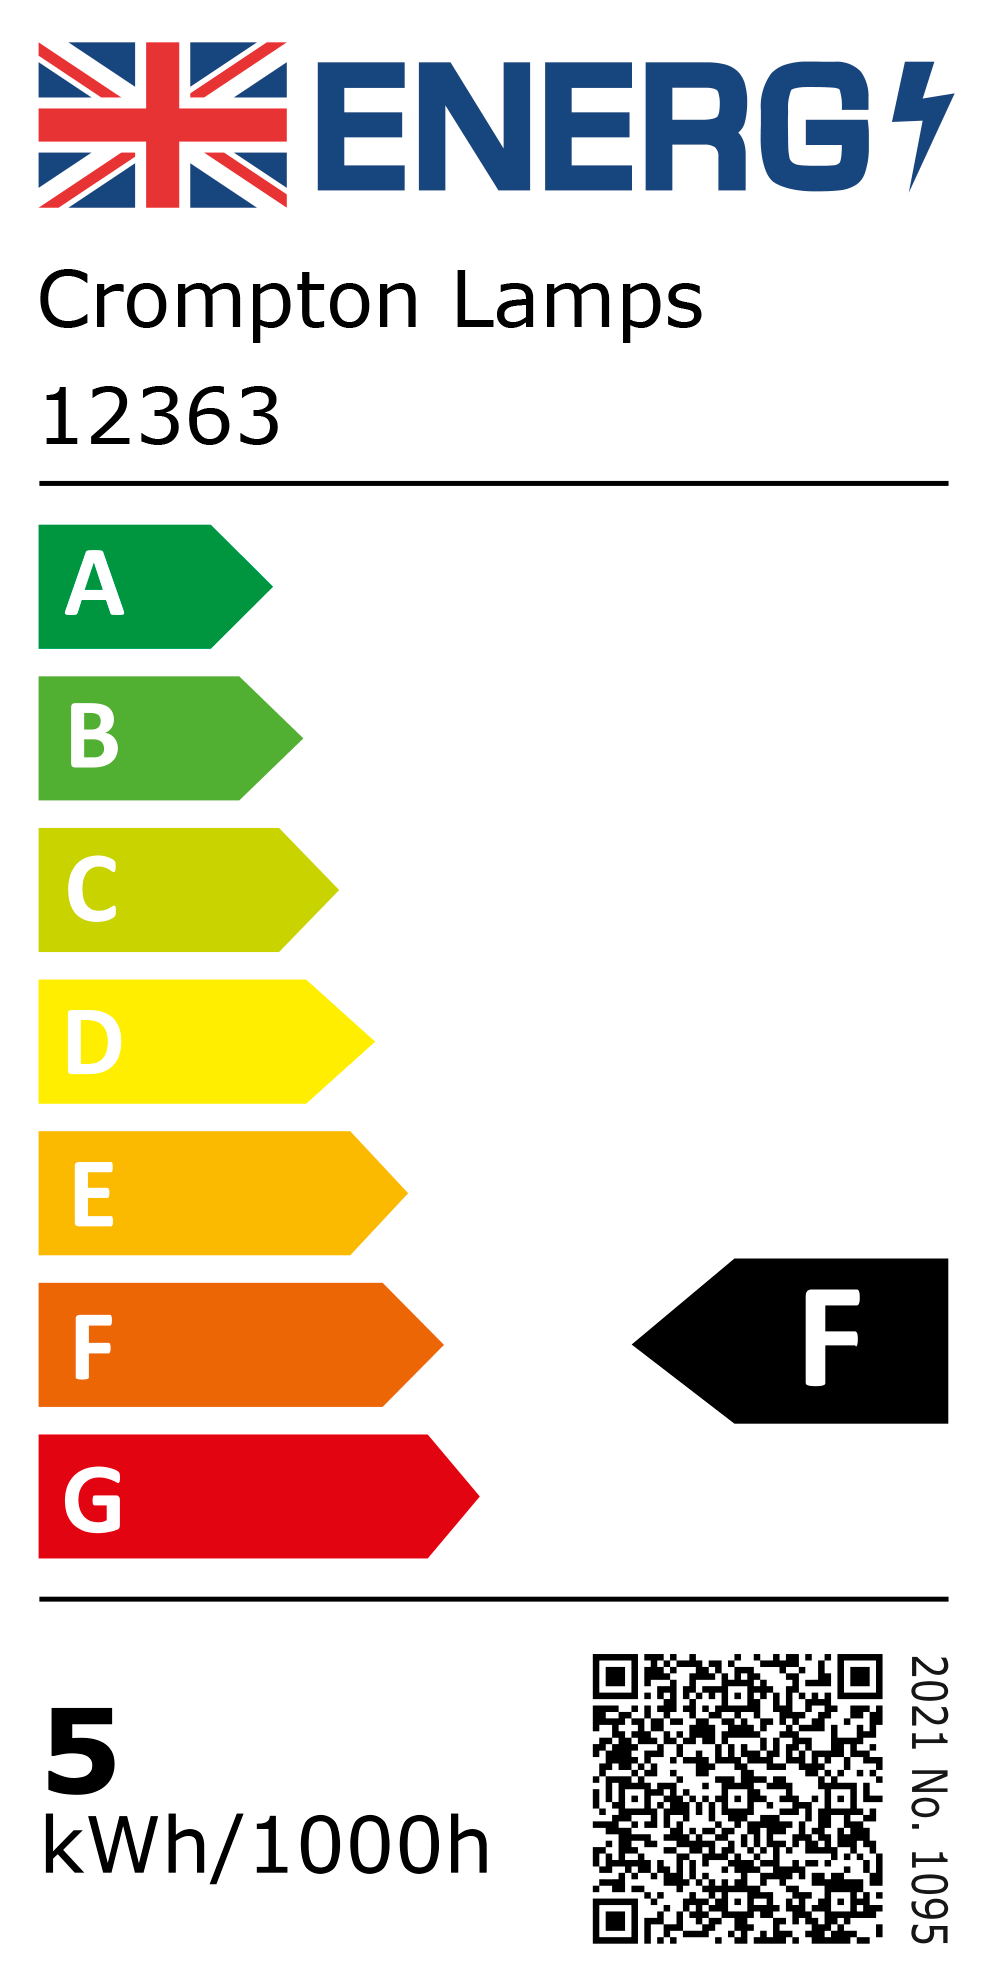 New 2021 Energy Rating Label: Stock Code 12363